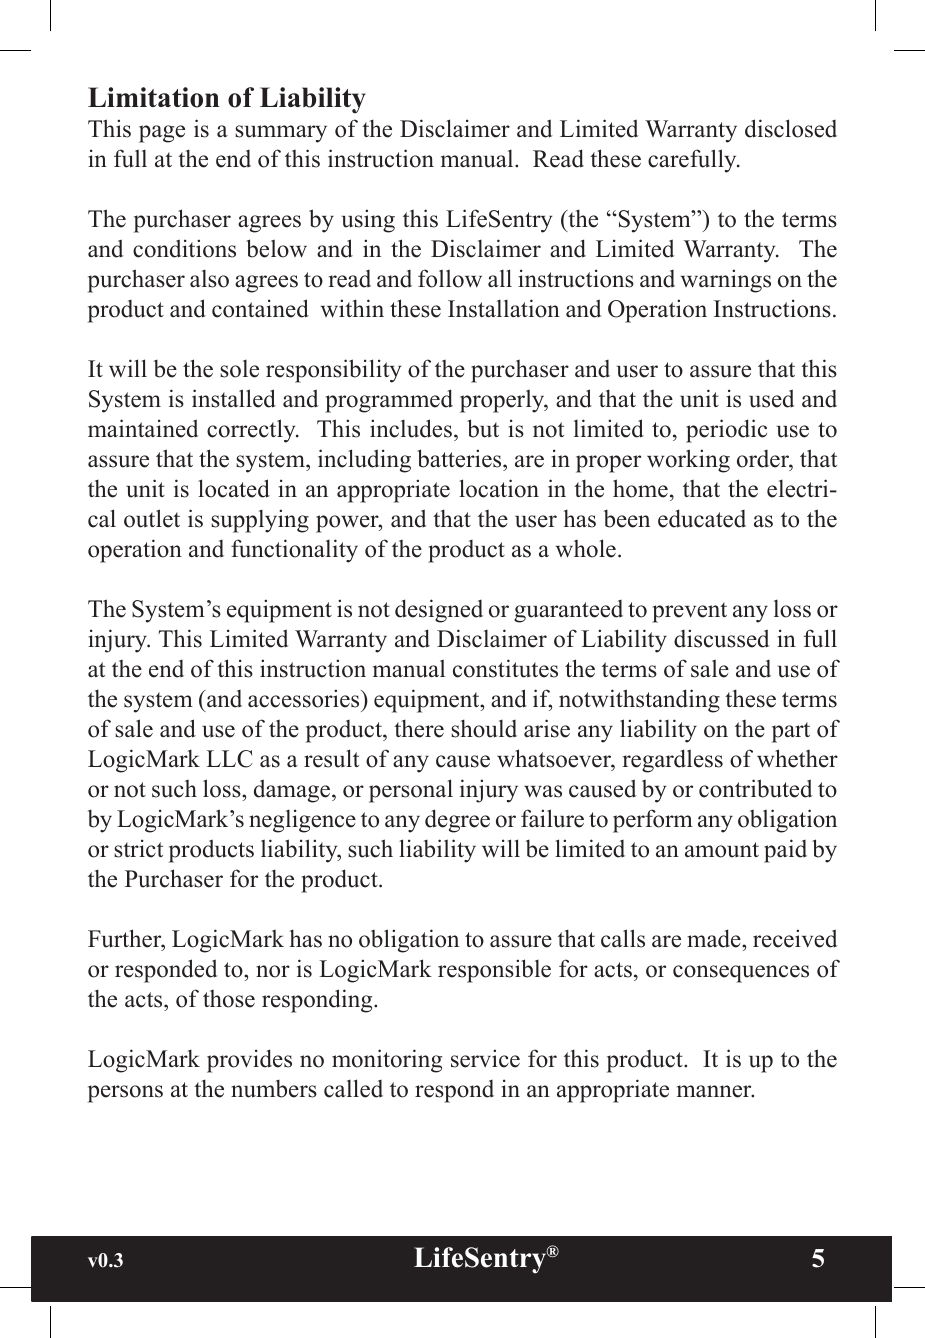 v0.3                                                      LifeSentry®                5Limitation of LiabilityThis page is a summary of the Disclaimer and Limited Warranty disclosed in full at the end of this instruction manual.  Read these carefully. The purchaser agrees by using this LifeSentry (the “System”) to the terms and  conditions  below  and  in  the  Disclaimer  and  Limited  Warranty.   The purchaser also agrees to read and follow all instructions and warnings on the product and contained  within these Installation and Operation Instructions.It will be the sole responsibility of the purchaser and user to assure that this System is installed and programmed properly, and that the unit is used and maintained correctly.  This includes, but is not limited to, periodic use to assure that the system, including batteries, are in proper working order, that the unit is located in an appropriate location in the home, that the electri-cal outlet is supplying power, and that the user has been educated as to the operation and functionality of the product as a whole.The System’s equipment is not designed or guaranteed to prevent any loss or injury. This Limited Warranty and Disclaimer of Liability discussed in full at the end of this instruction manual constitutes the terms of sale and use of the system (and accessories) equipment, and if, notwithstanding these terms of sale and use of the product, there should arise any liability on the part of LogicMark LLC as a result of any cause whatsoever, regardless of whether or not such loss, damage, or personal injury was caused by or contributed to by LogicMark’s negligence to any degree or failure to perform any obligation or strict products liability, such liability will be limited to an amount paid by the Purchaser for the product.Further, LogicMark has no obligation to assure that calls are made, received or responded to, nor is LogicMark responsible for acts, or consequences of the acts, of those responding.LogicMark provides no monitoring service for this product.  It is up to the persons at the numbers called to respond in an appropriate manner.